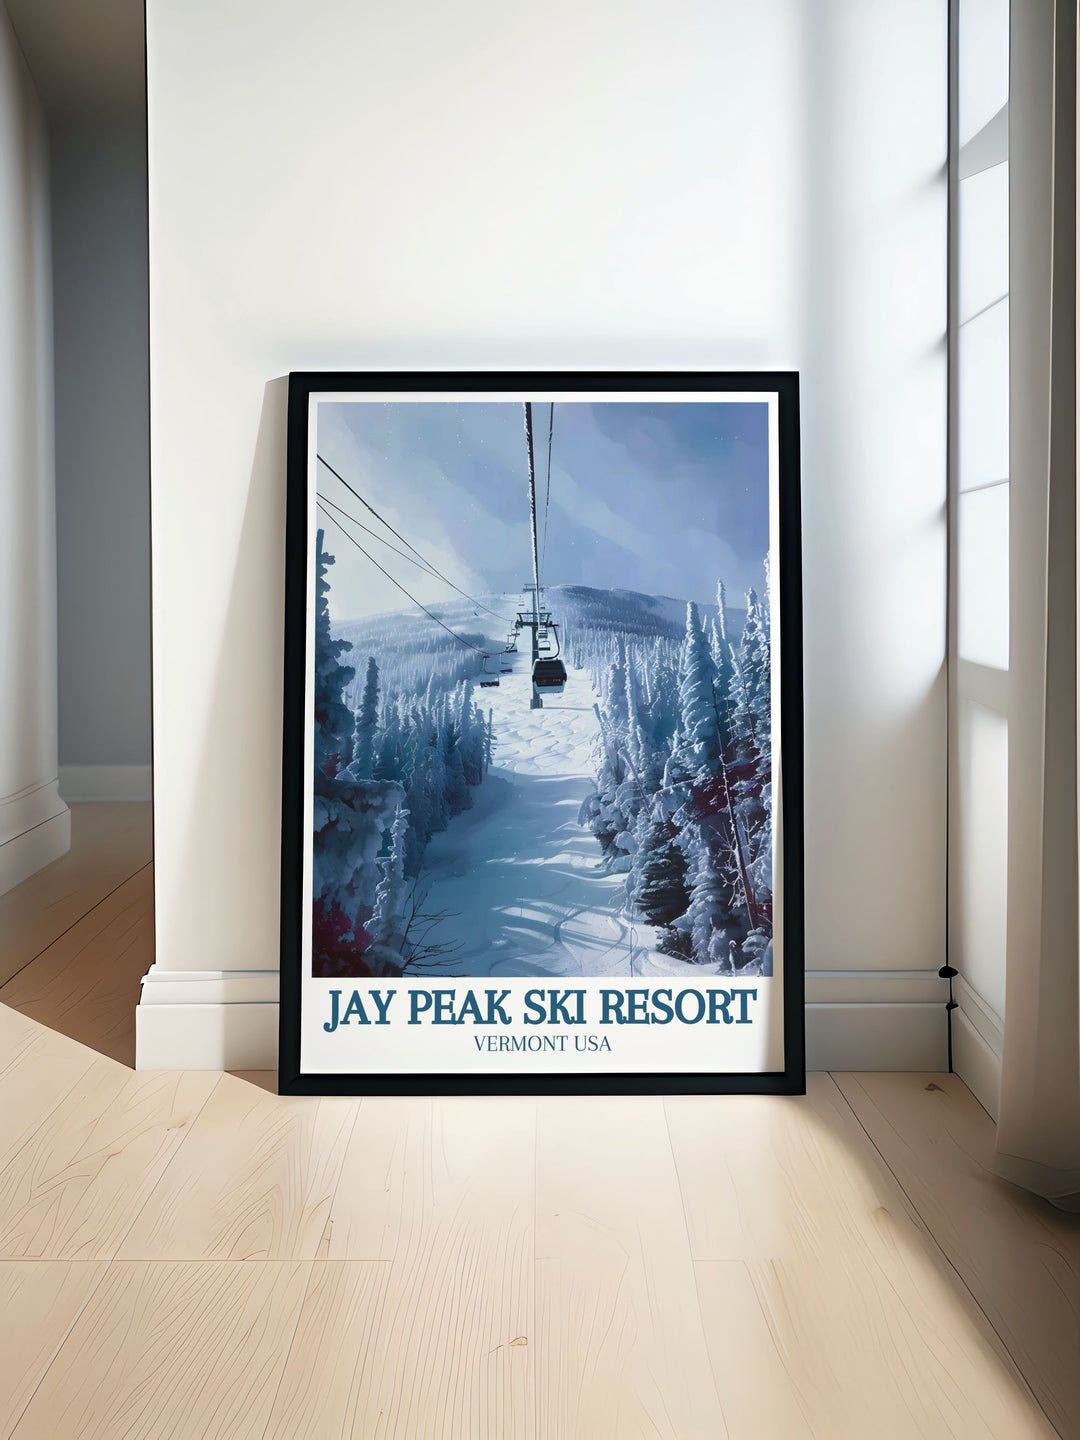 This travel poster of Jay Peak Ski Resort in Vermont showcases the extensive ski terrain and vibrant winter activities available at the resort.